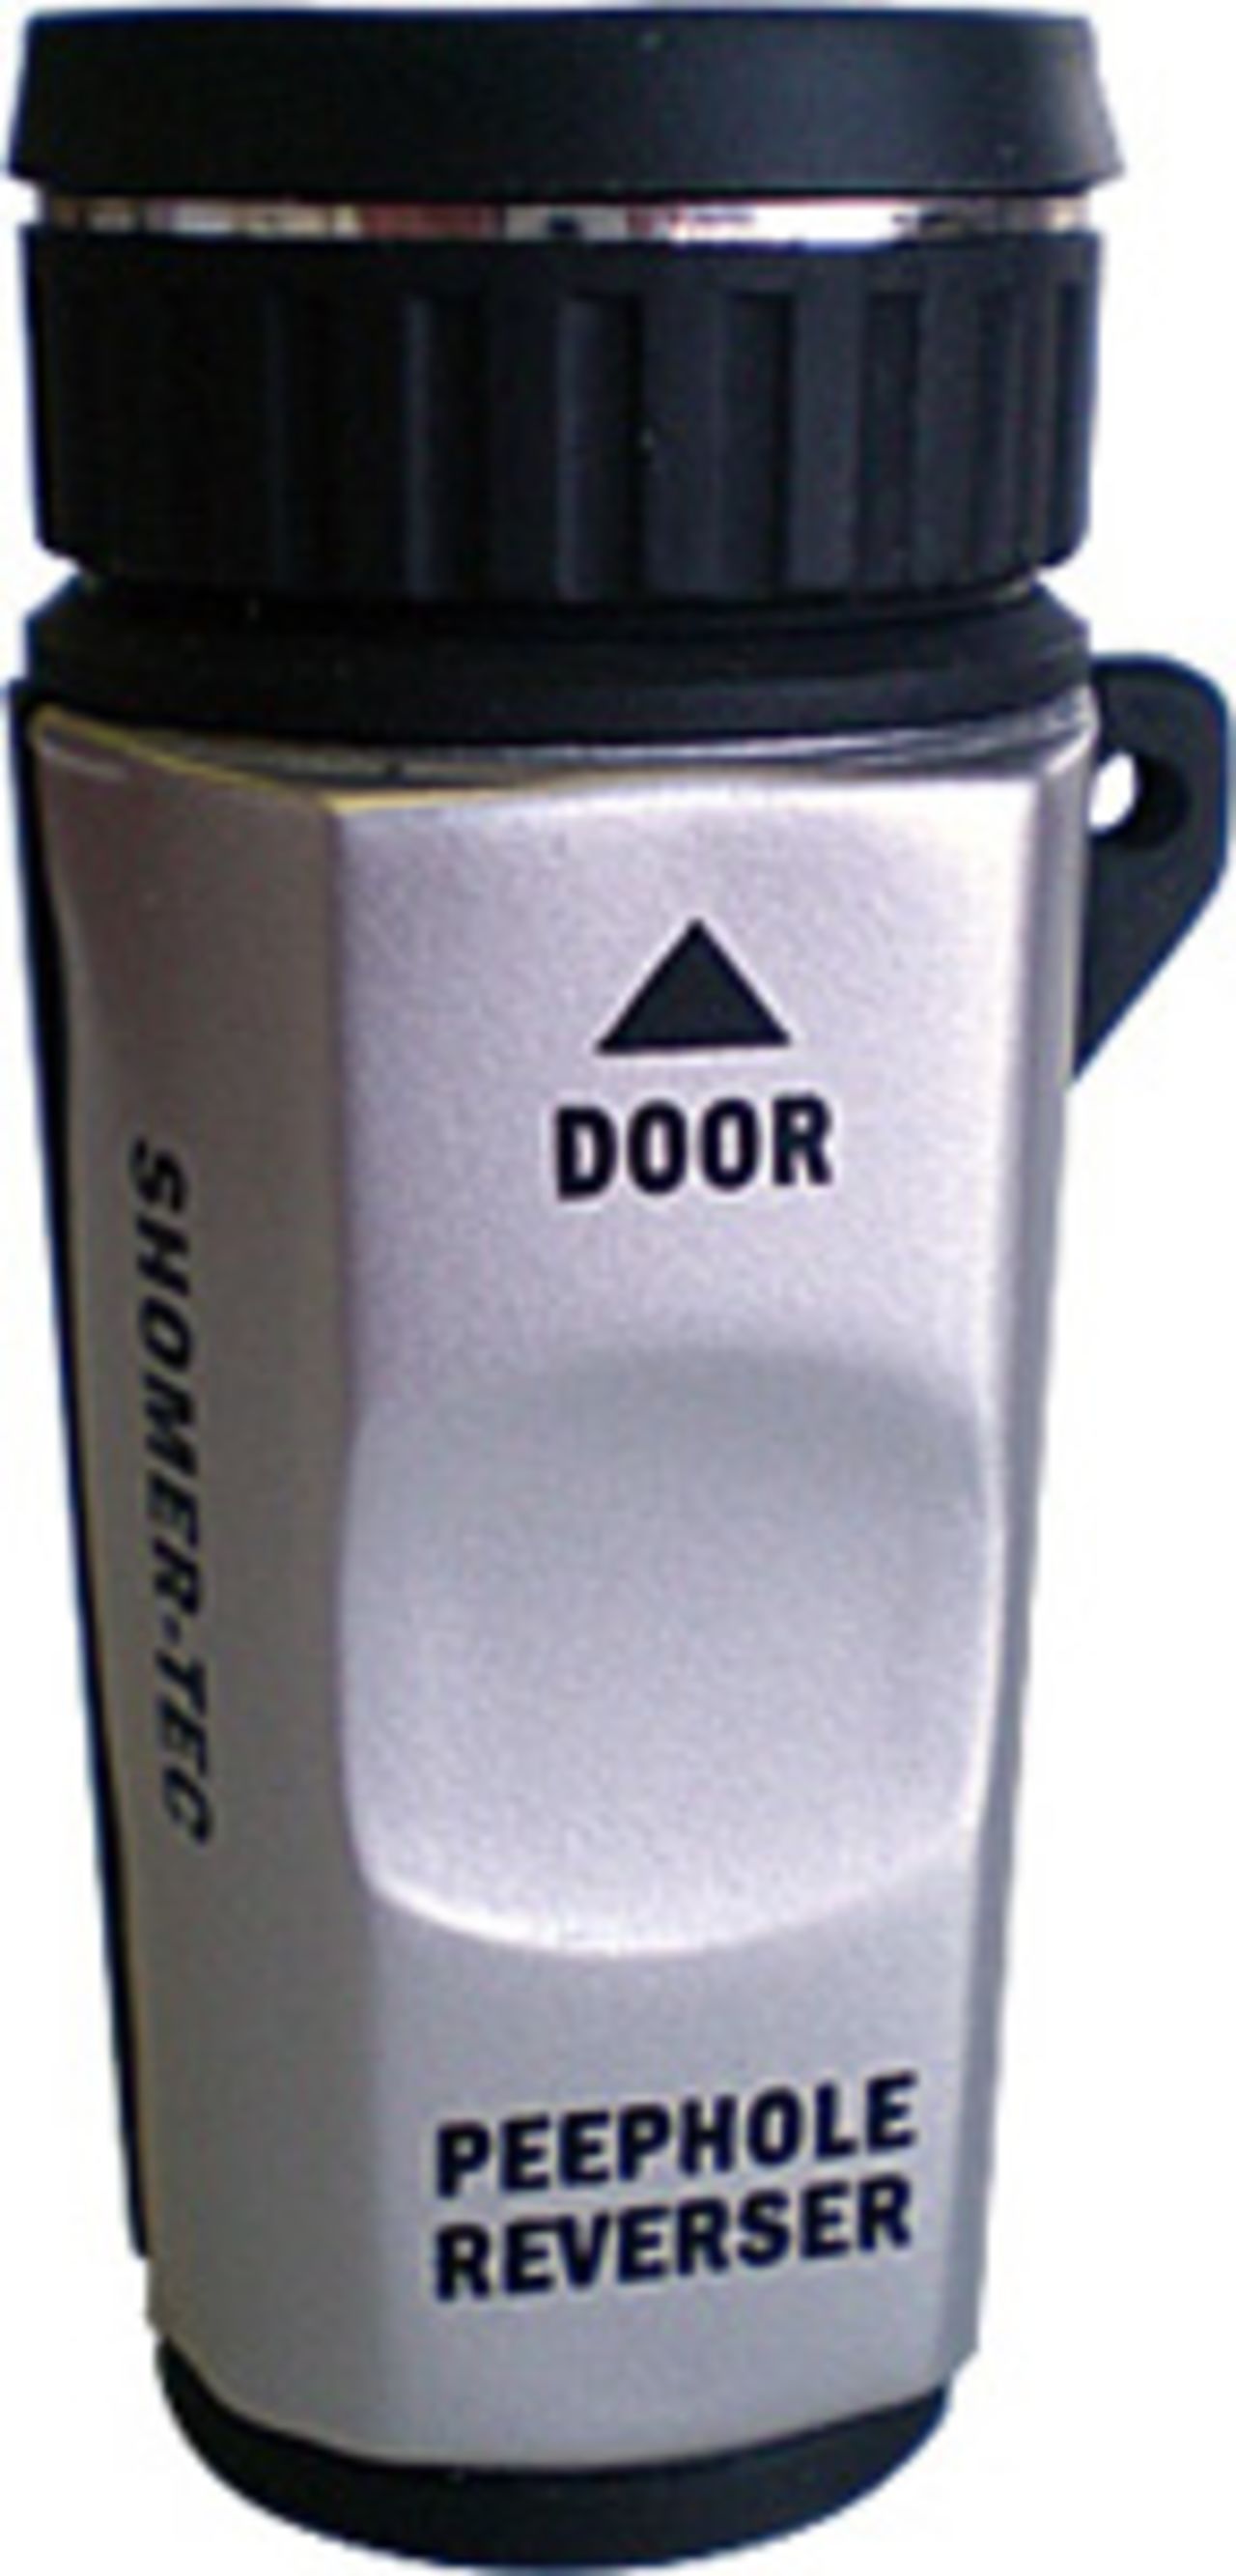 But what other tools are available for emergency situations? Just as homeowners can protect themselves by using their peephole to identify visitors before opening the door, this simple gadget can reverse the effect so law enforcers can inspect what is going on inside a home before entering. 